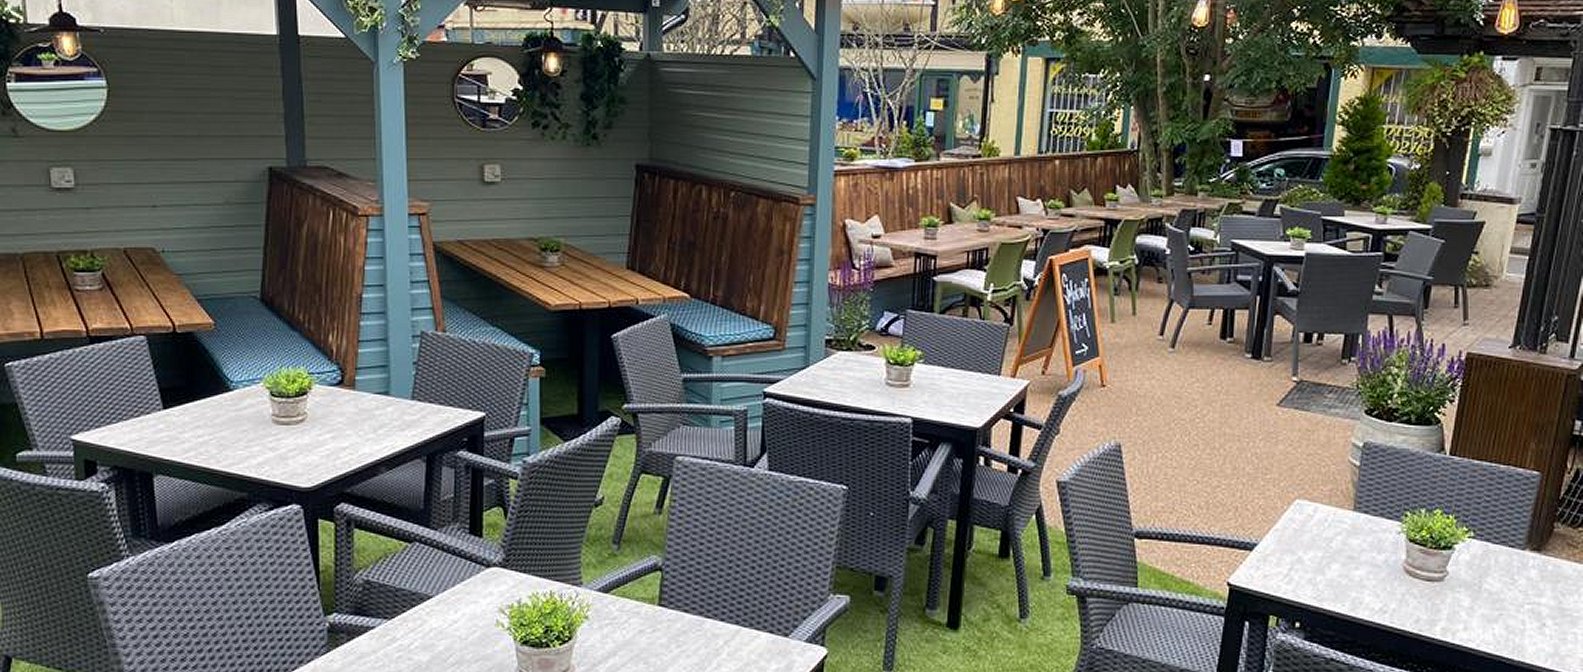 New terrace at The White Hart Hotel & Restaurant Whitchurch accommodation/bed-and-breakfast/pub food Newbury